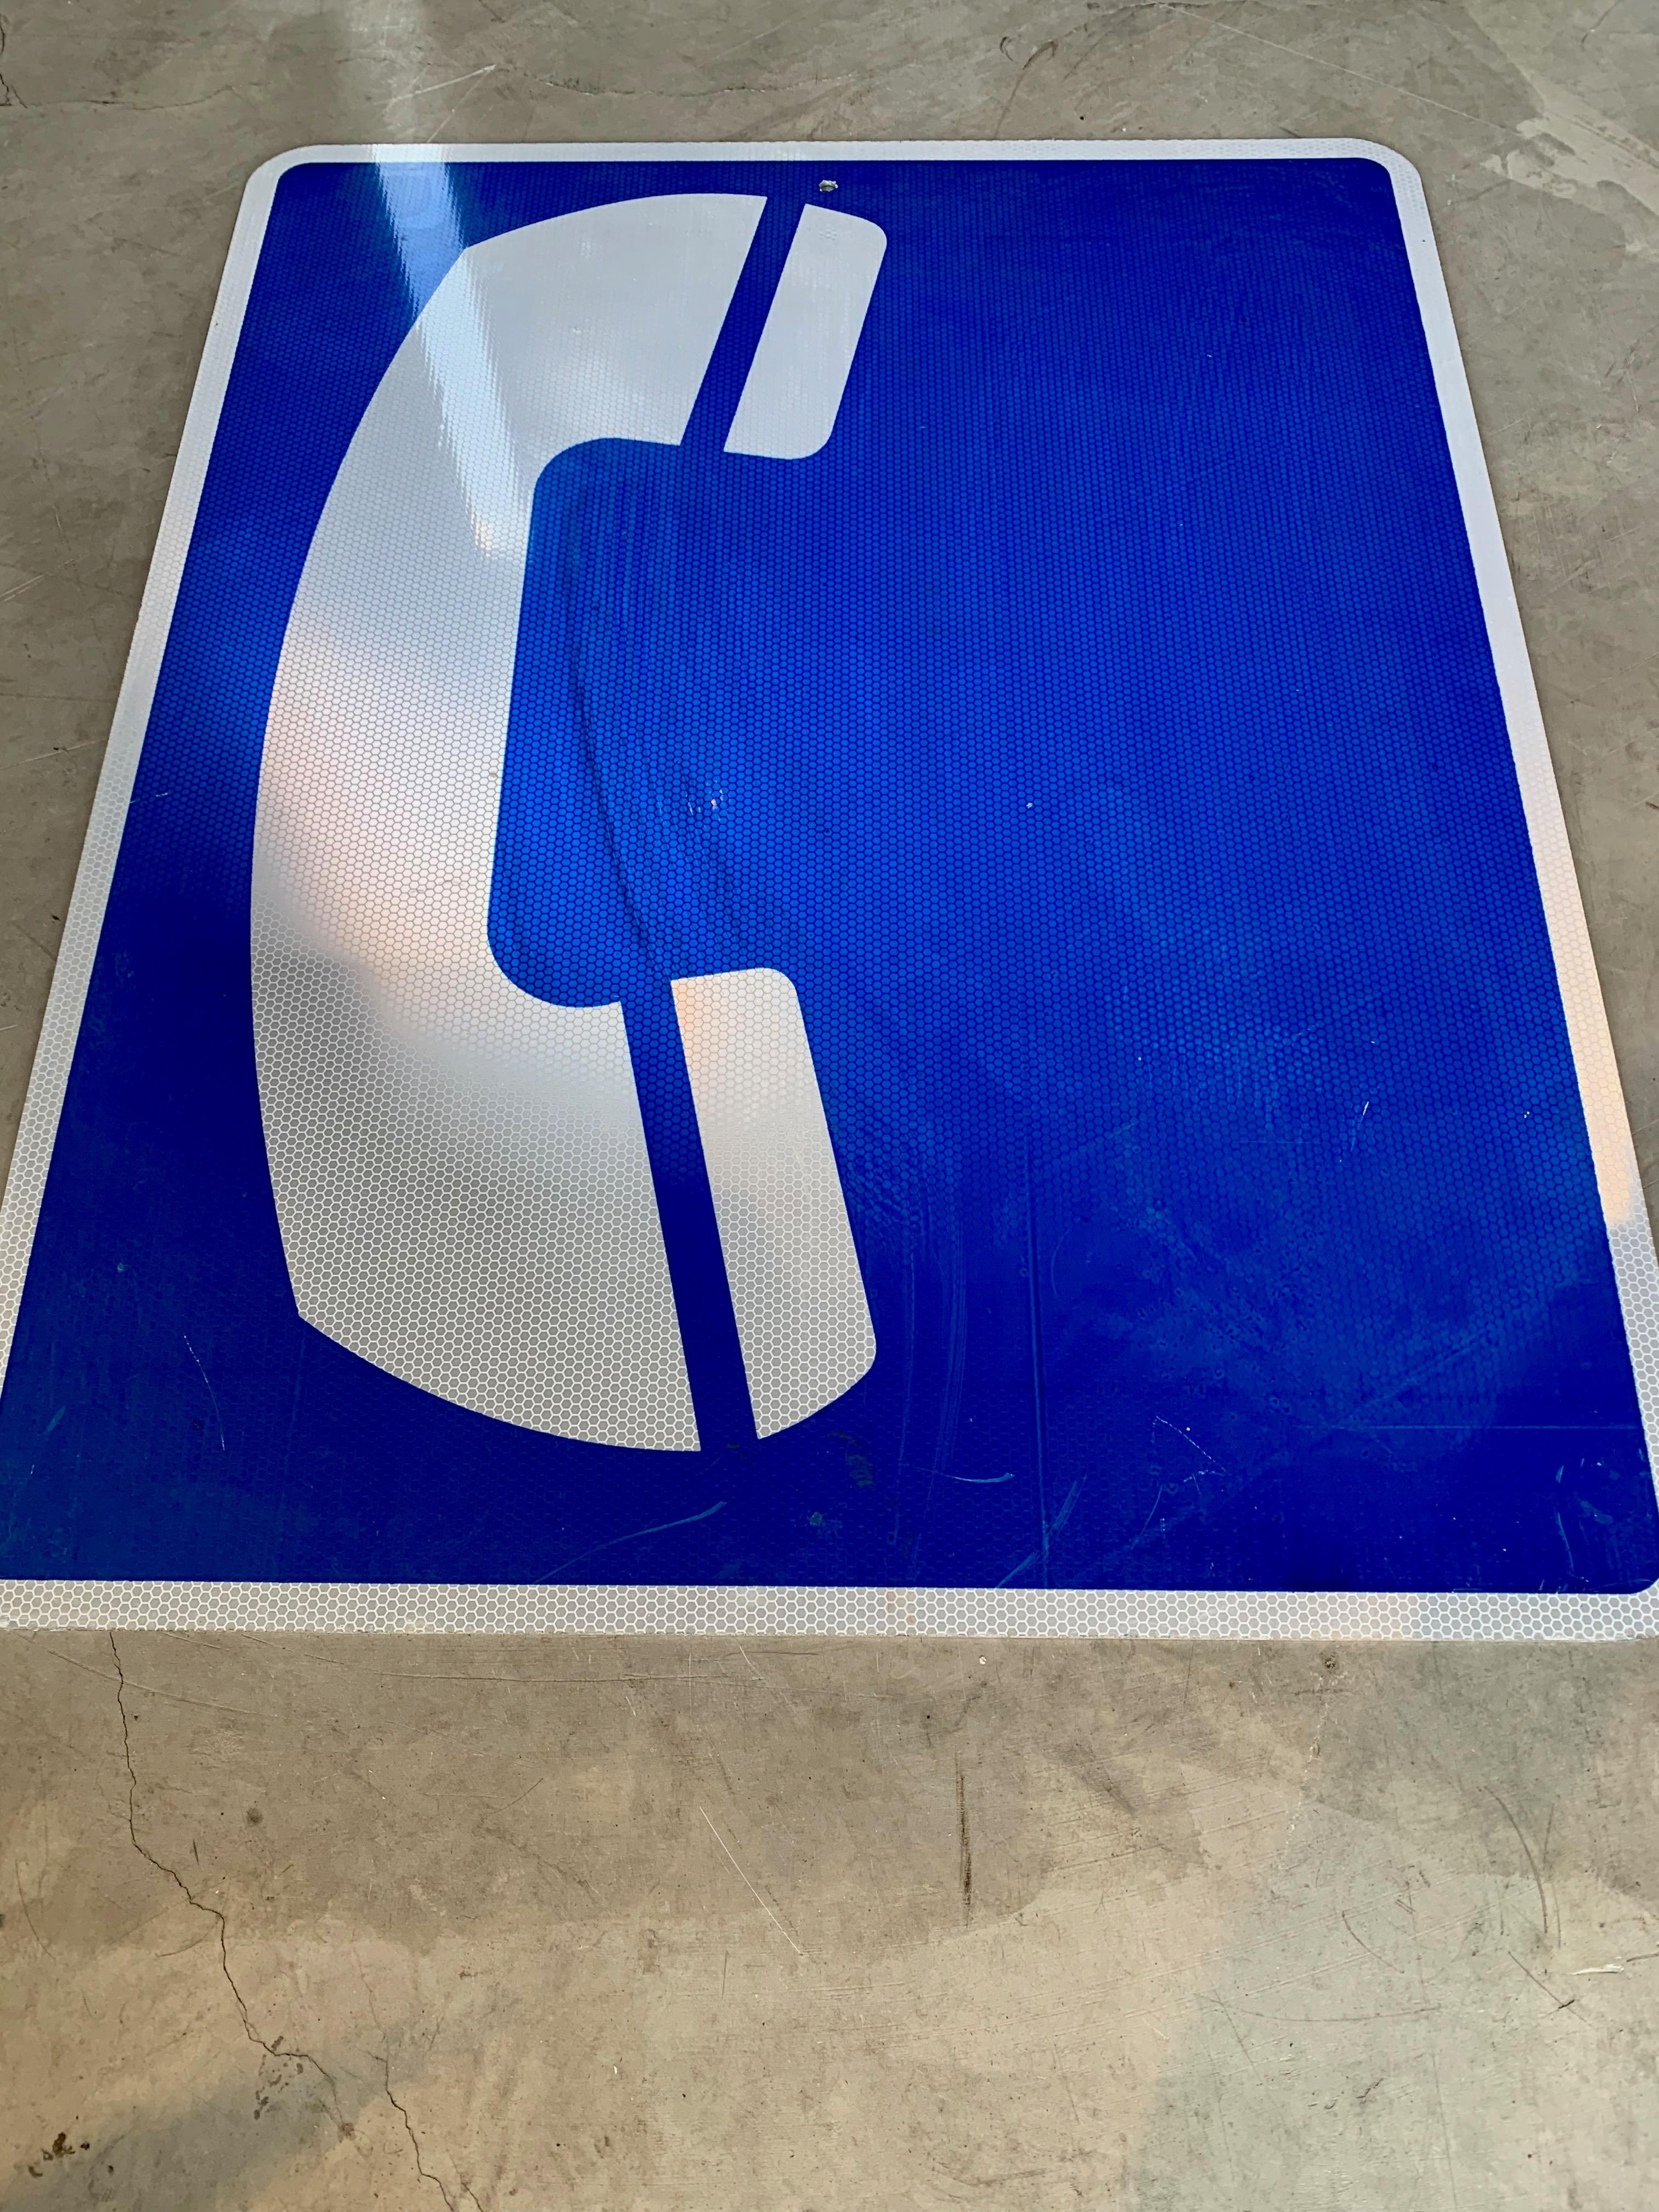 Cool vintage highway sign in cobalt blue reflective metal. Depicts a large white phone on a blue background. Sign was used to direct drivers to a callbox or phone up ahead. Large size at 24